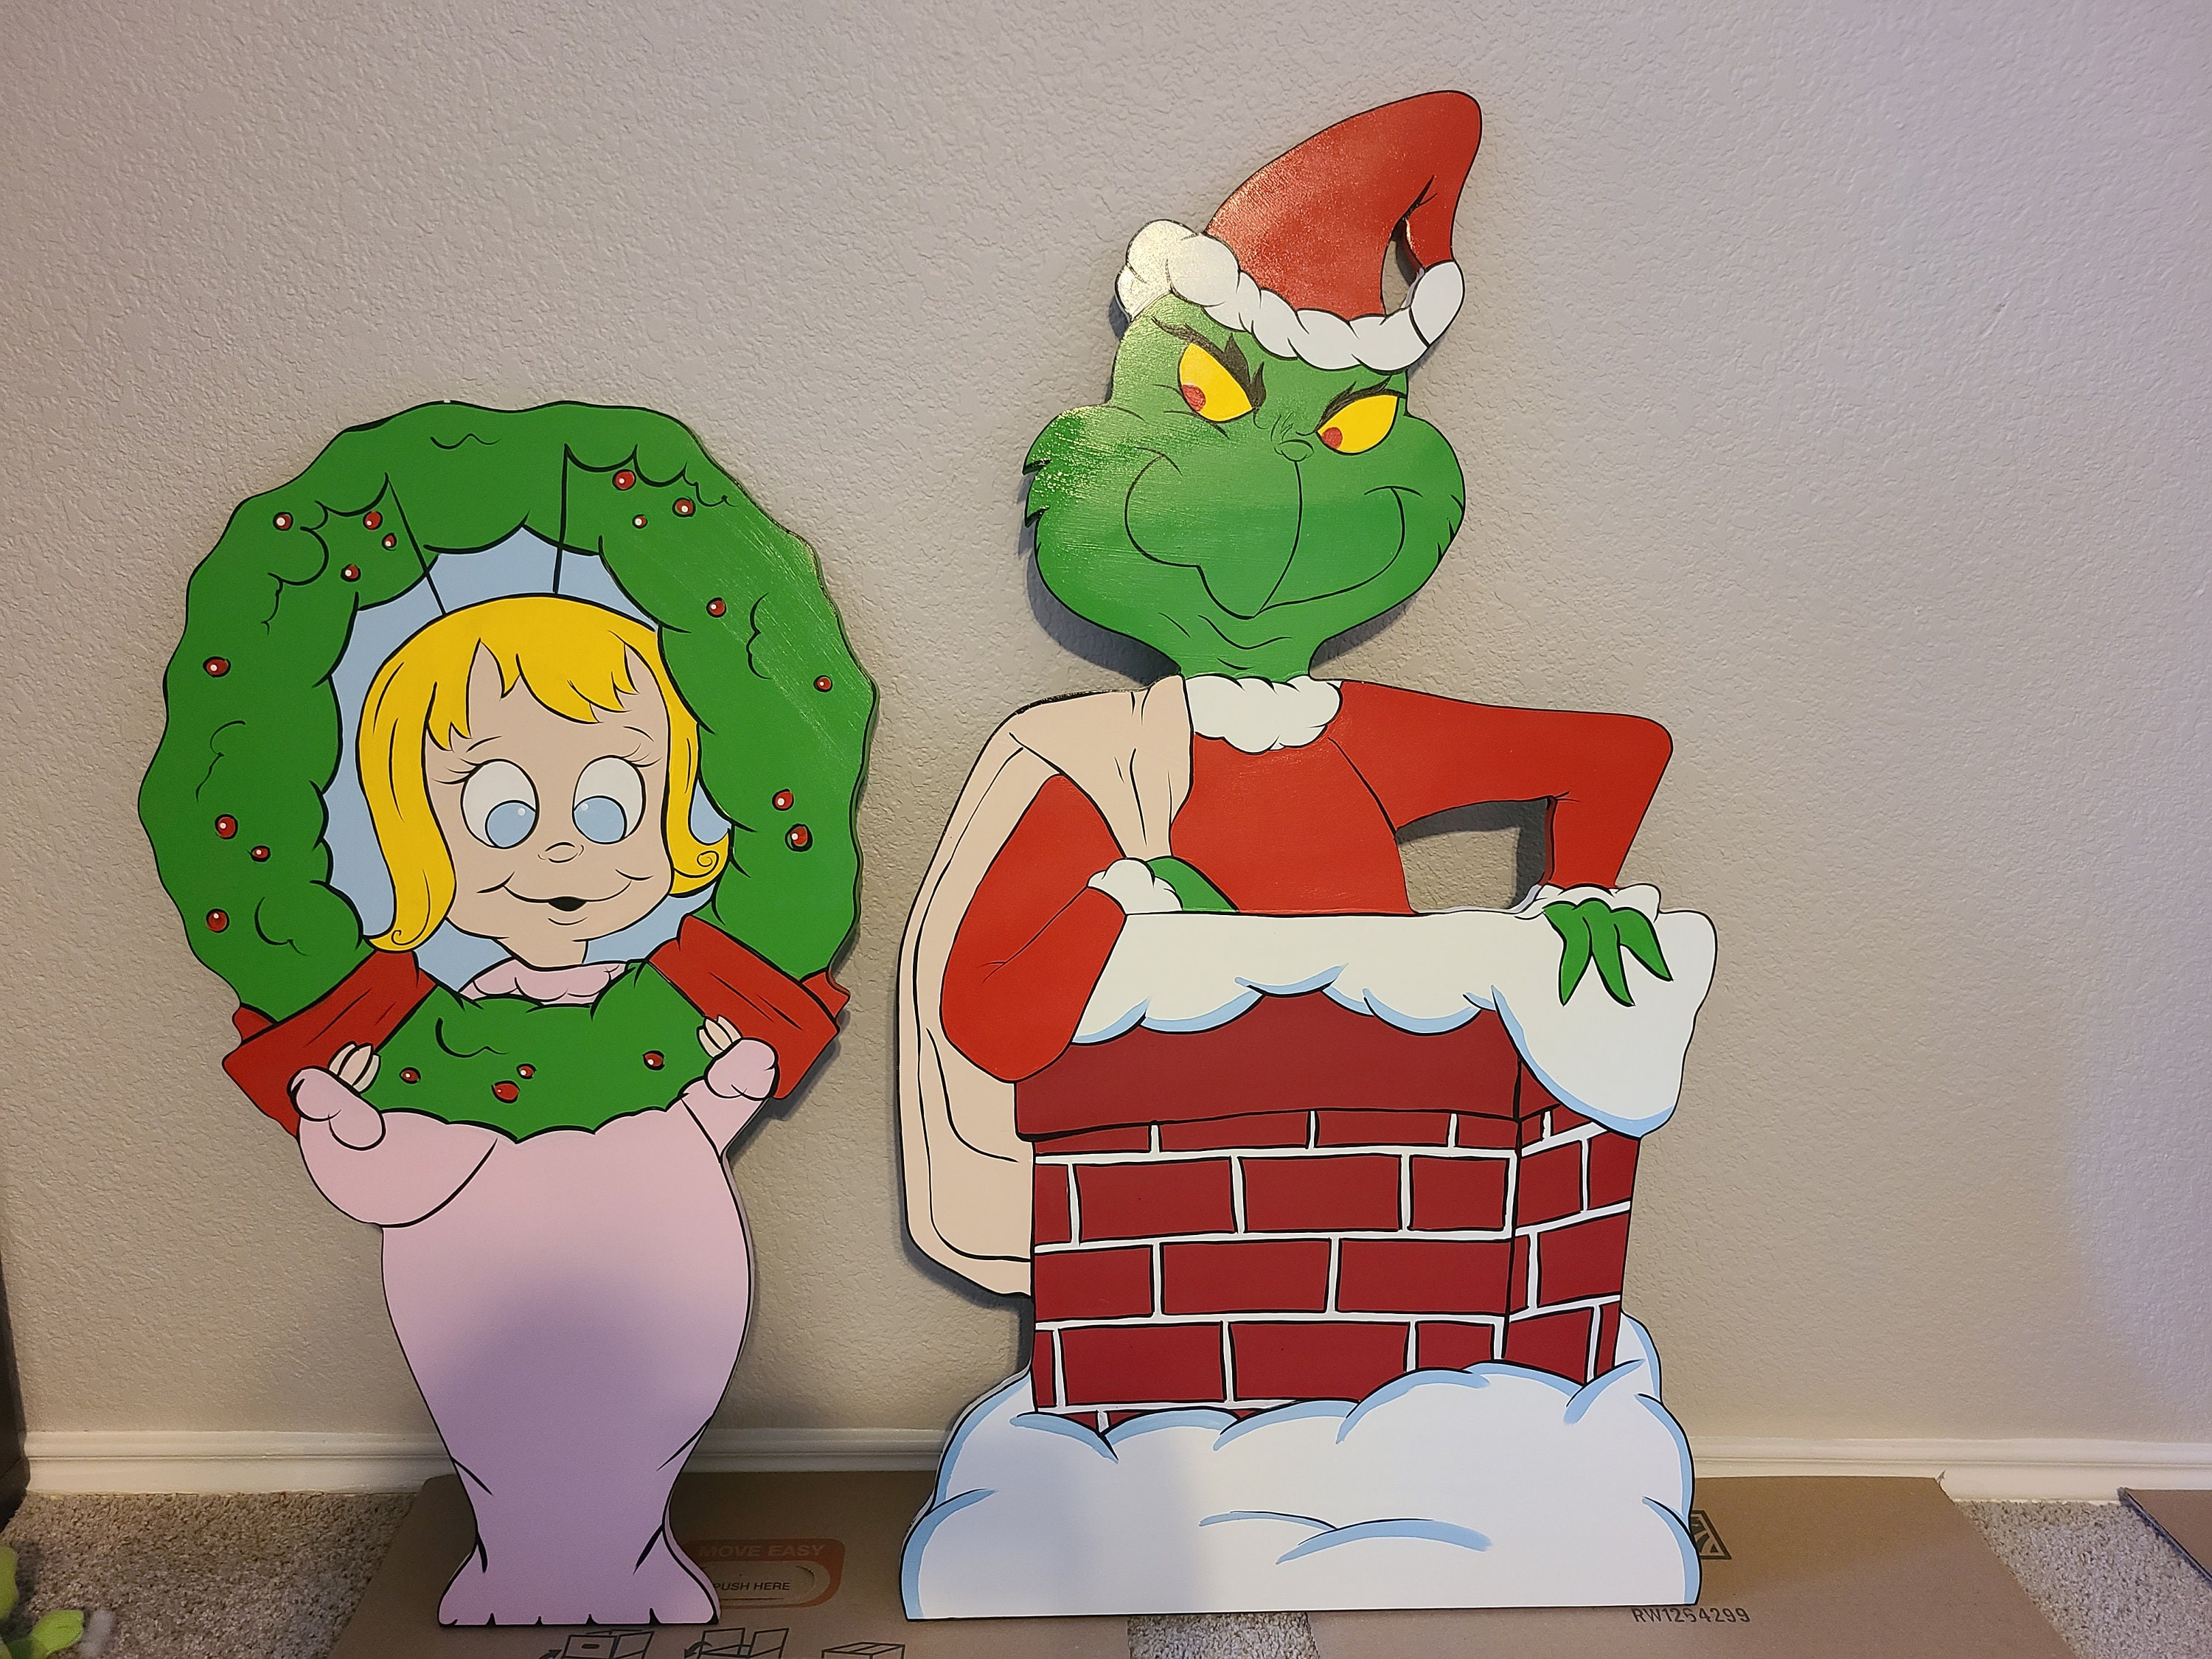 Chimney Grinch Max and Cindy Lou Who With Wreath | Etsy